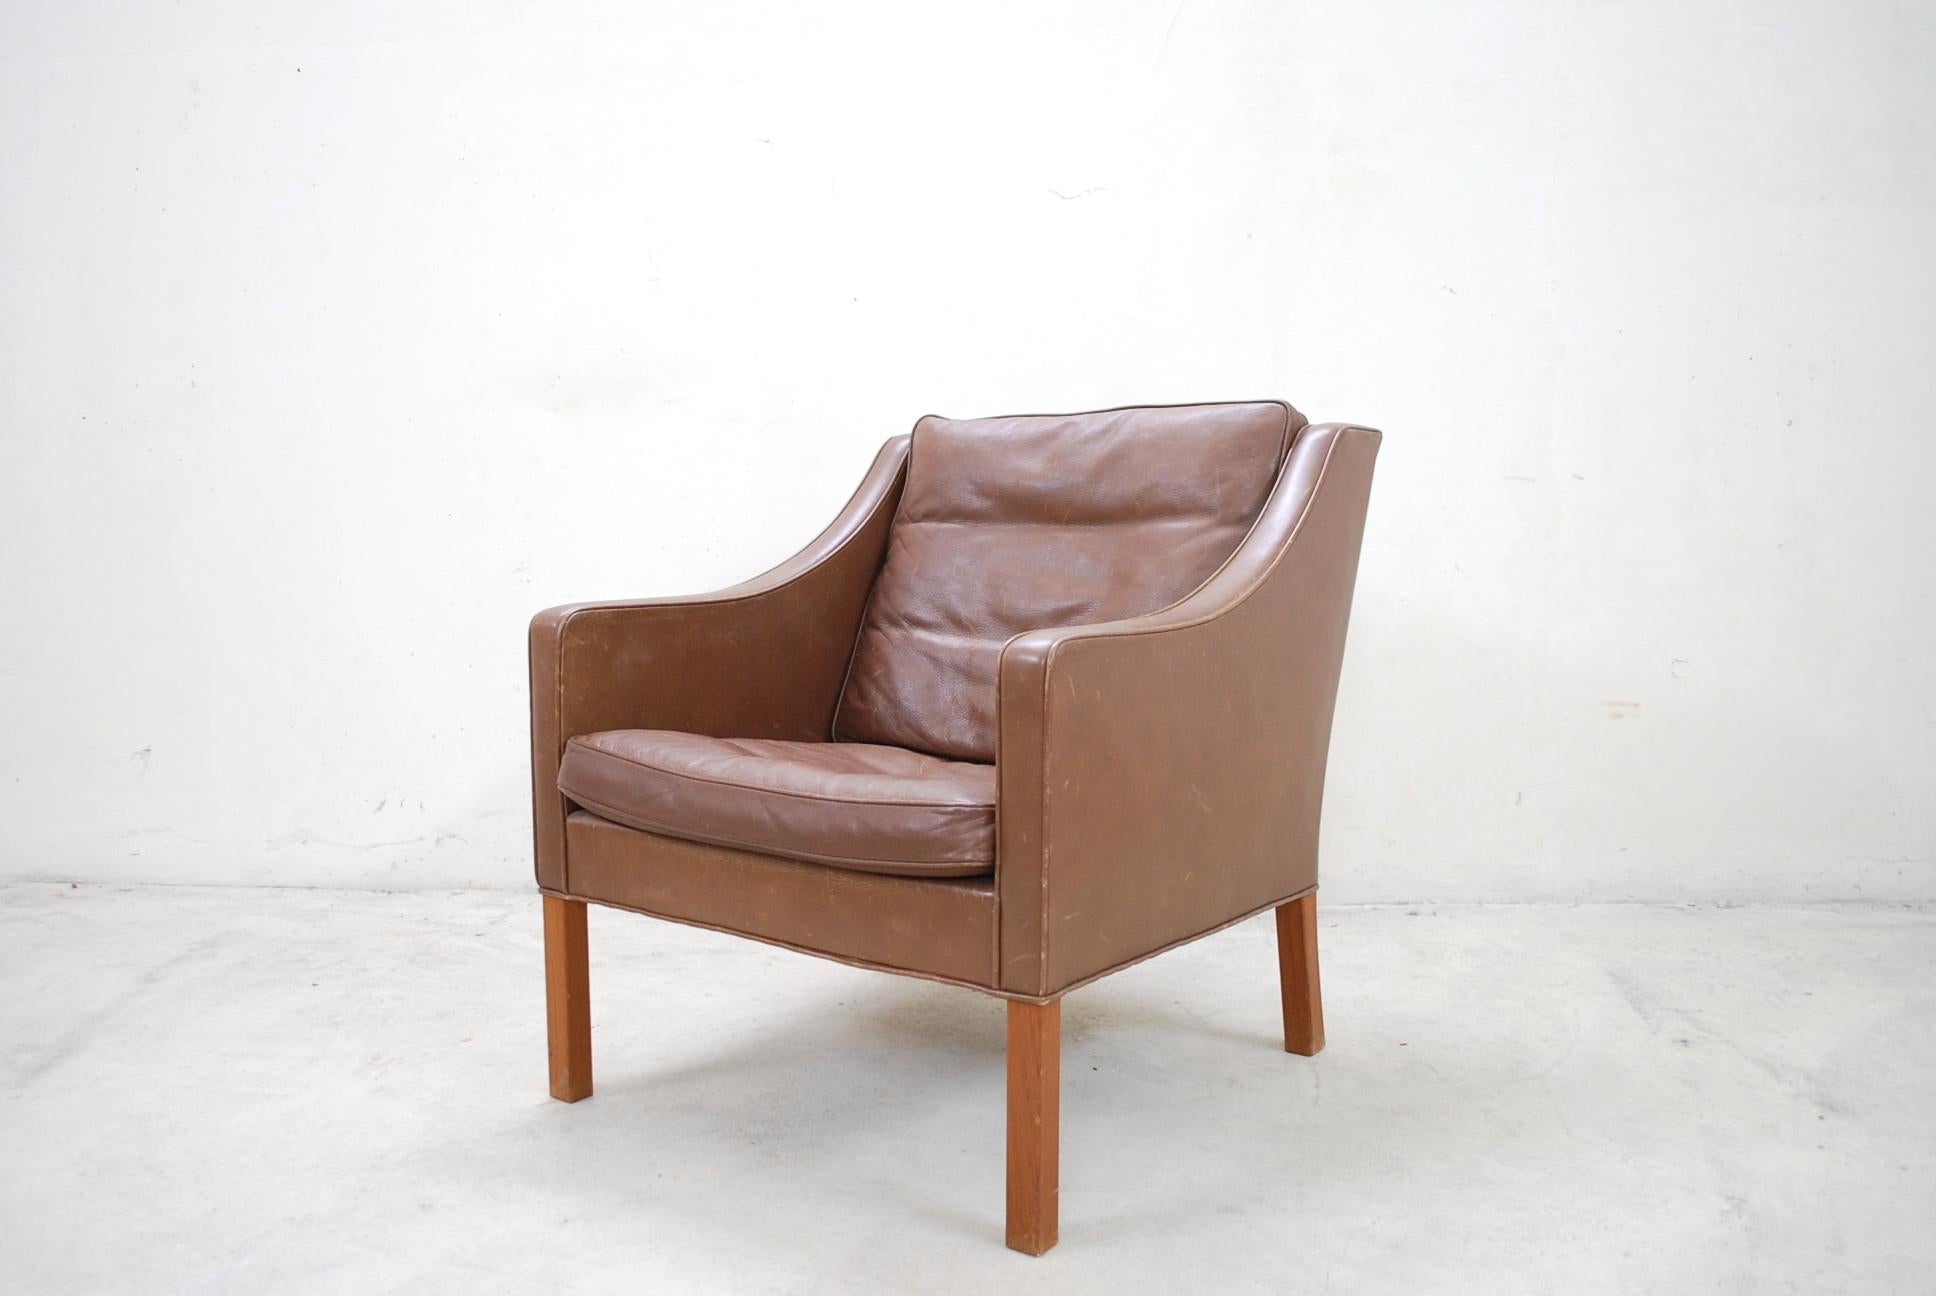 Børge Mogensen designed this leather armchair model 2207 for Fredericia Stolefabrik.
It´s a semi aniline brown leather with teak legs. The leather is patinated.
A Danish masterpiece of upholstery design and great seating comfort.
 